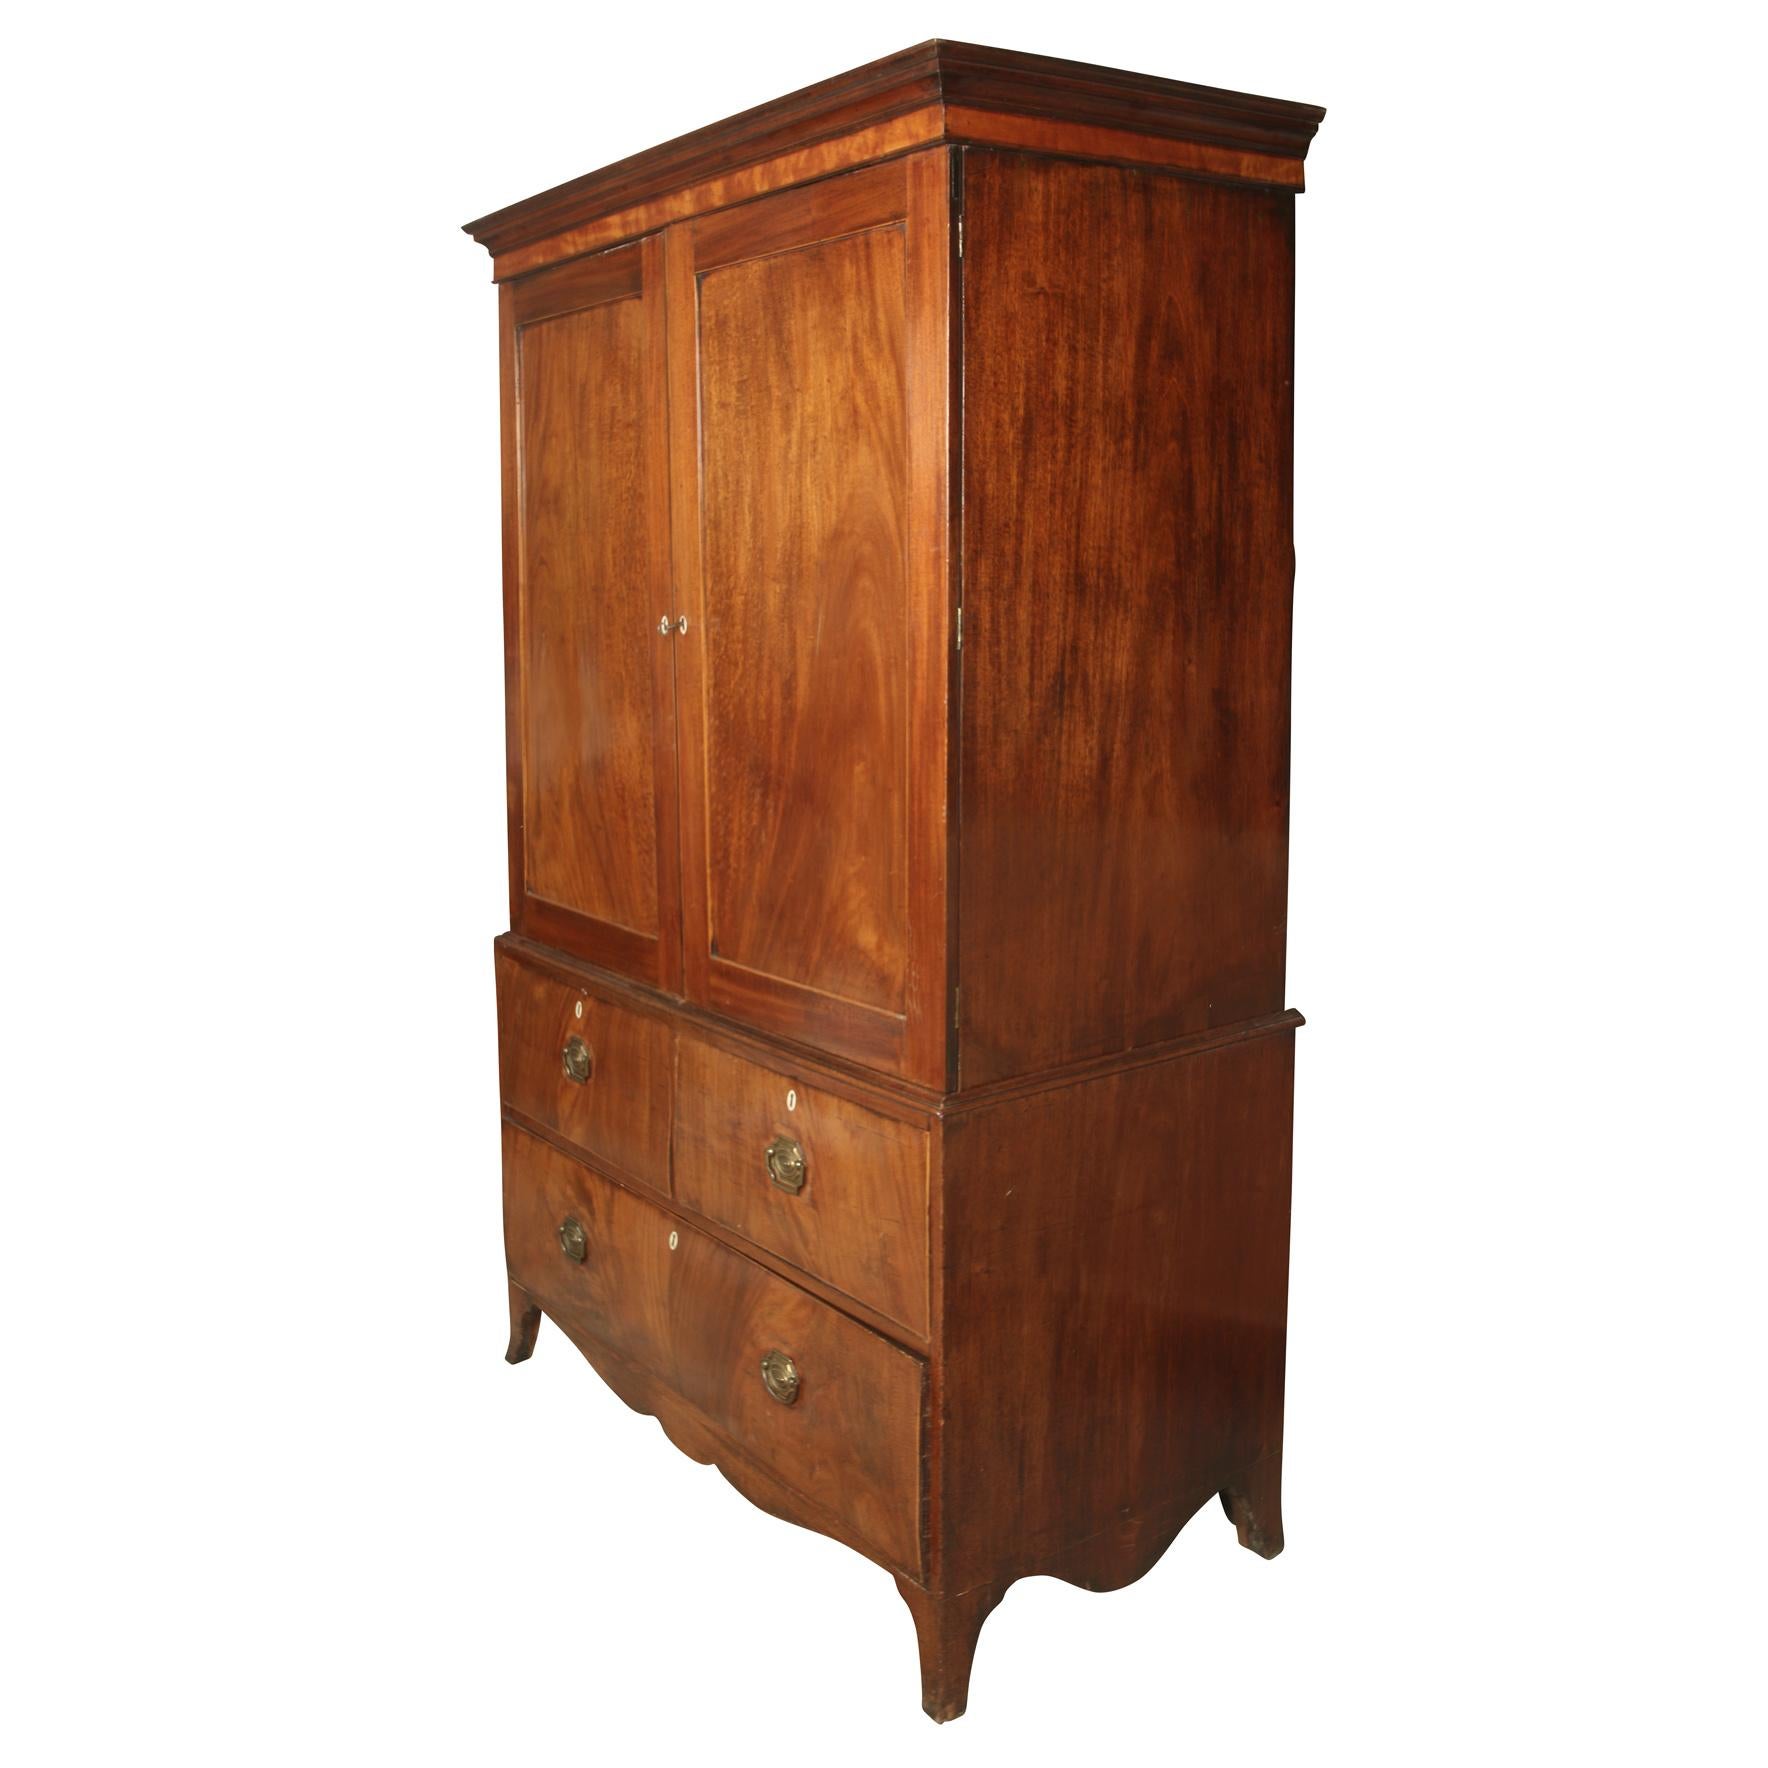 Large English mahogany linen press armoire, provenance Sotheby's. Two doors above with crown molding at top and three drawers below and scalloped apron below the drawers.